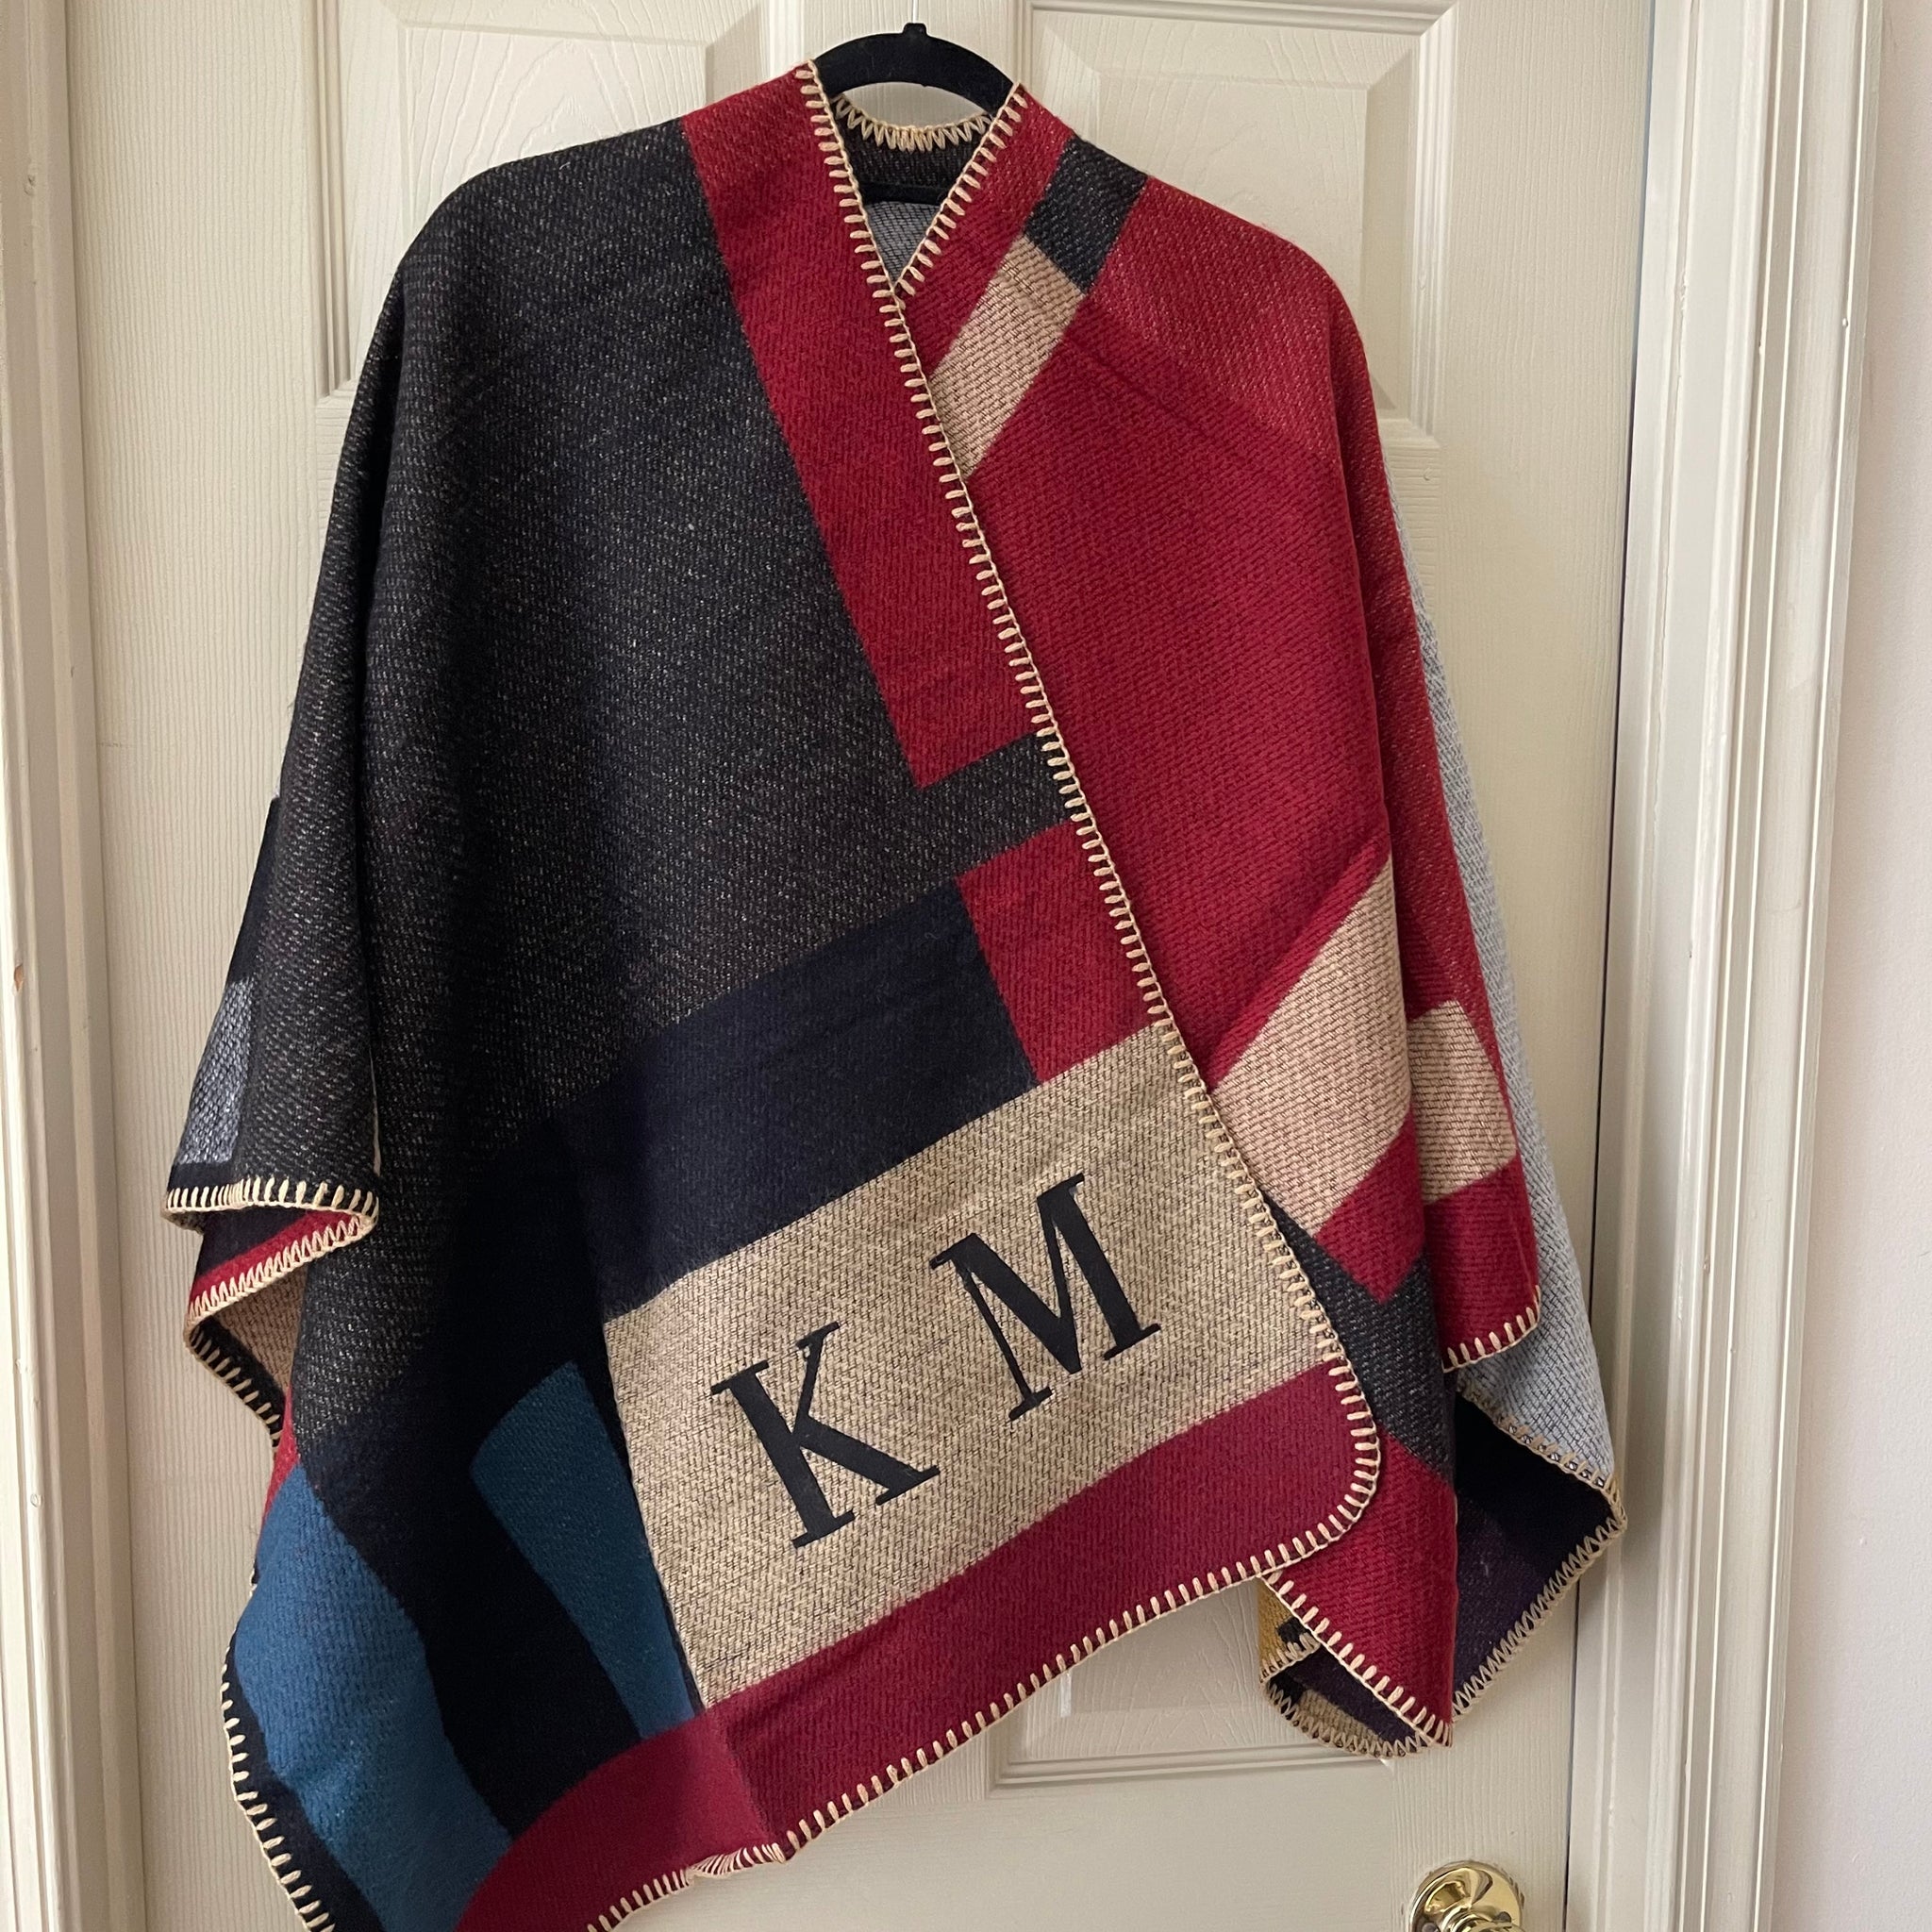 this is an image of our multi colored plaid poncho with initials KM